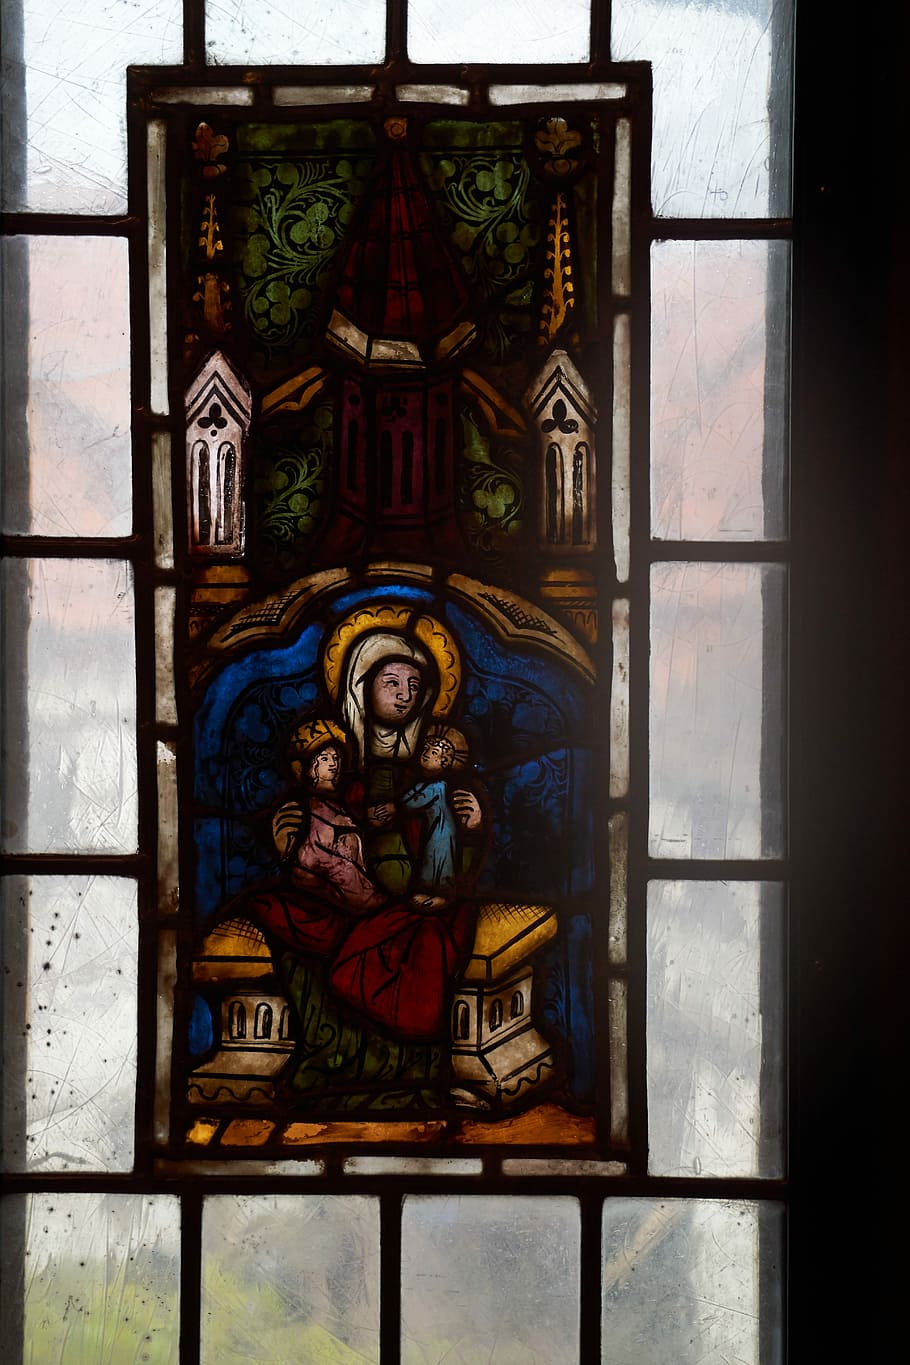 Middle Ages, Wartburg Castle, christianity, church, window, artwork, glass, religion, spirituality, history